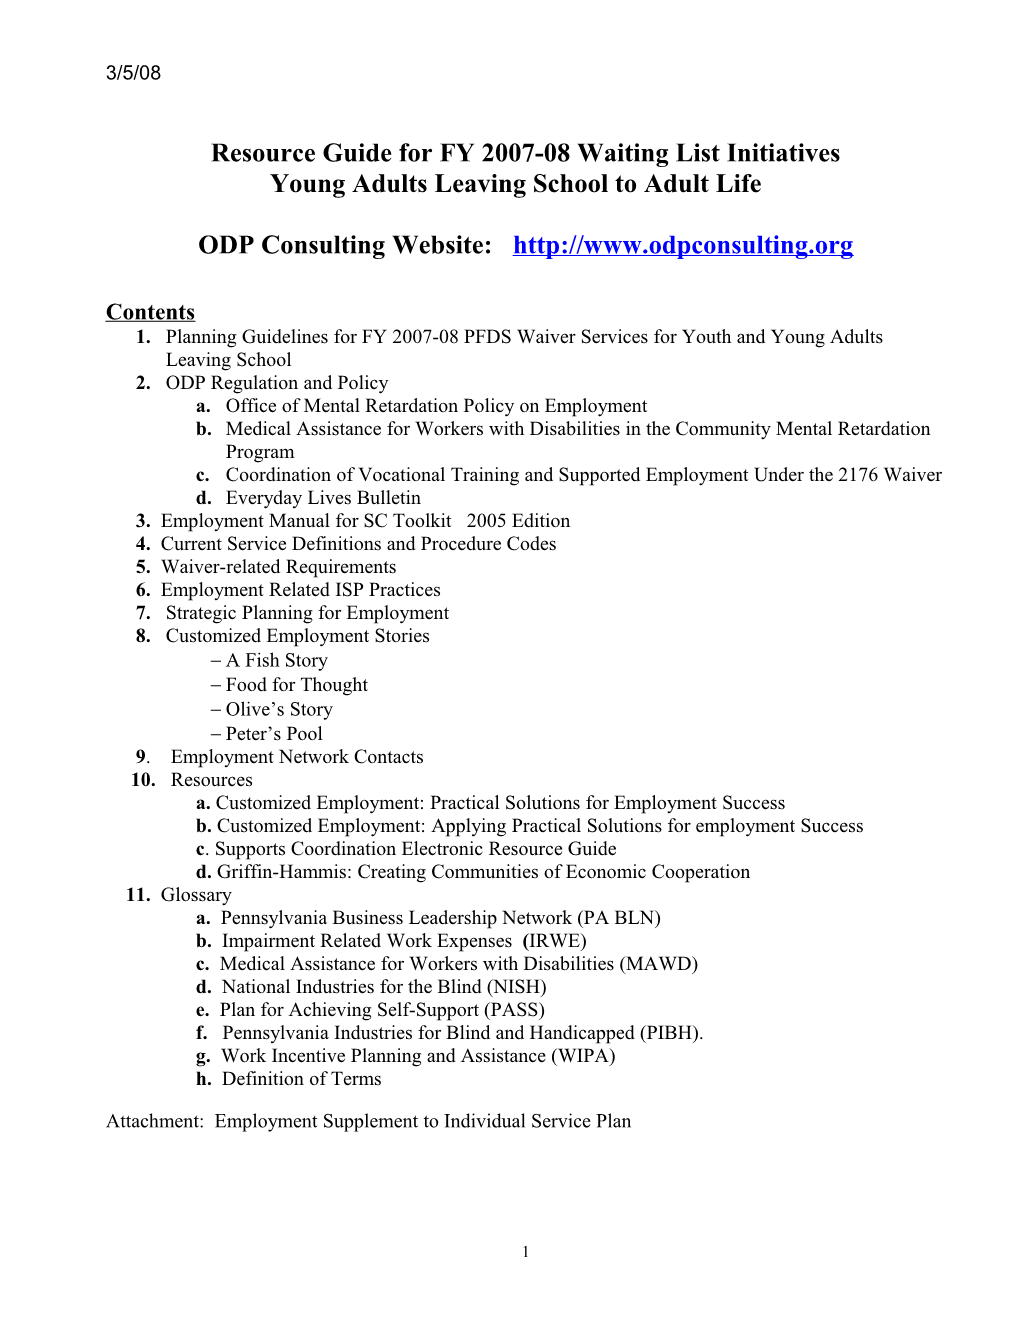 Resource Guide for FY 2007-08 Waiting List Initiatives